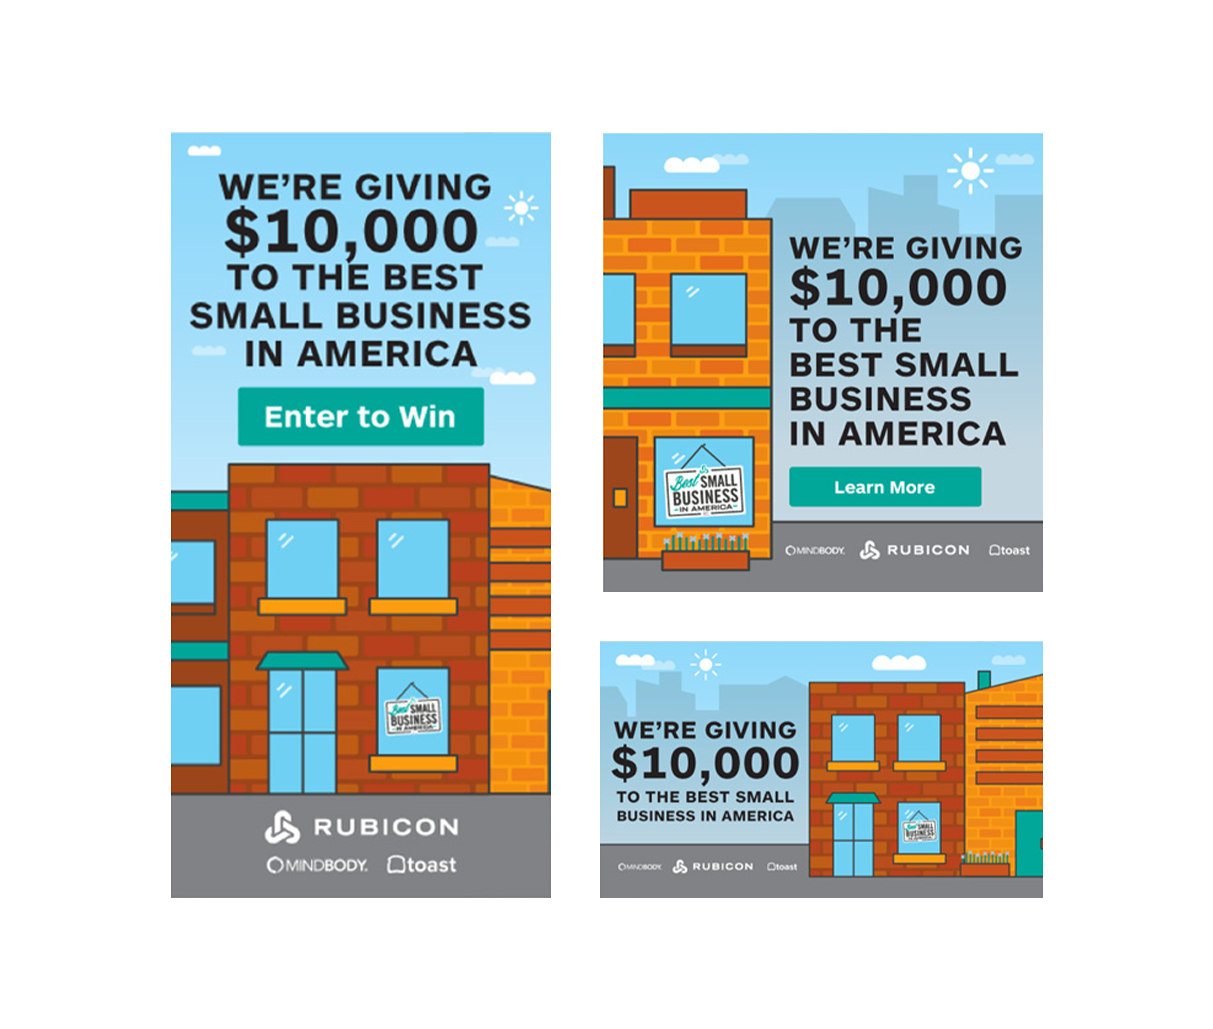 Digital ad aggregation for Rubicon's Best Small Business in America campaign